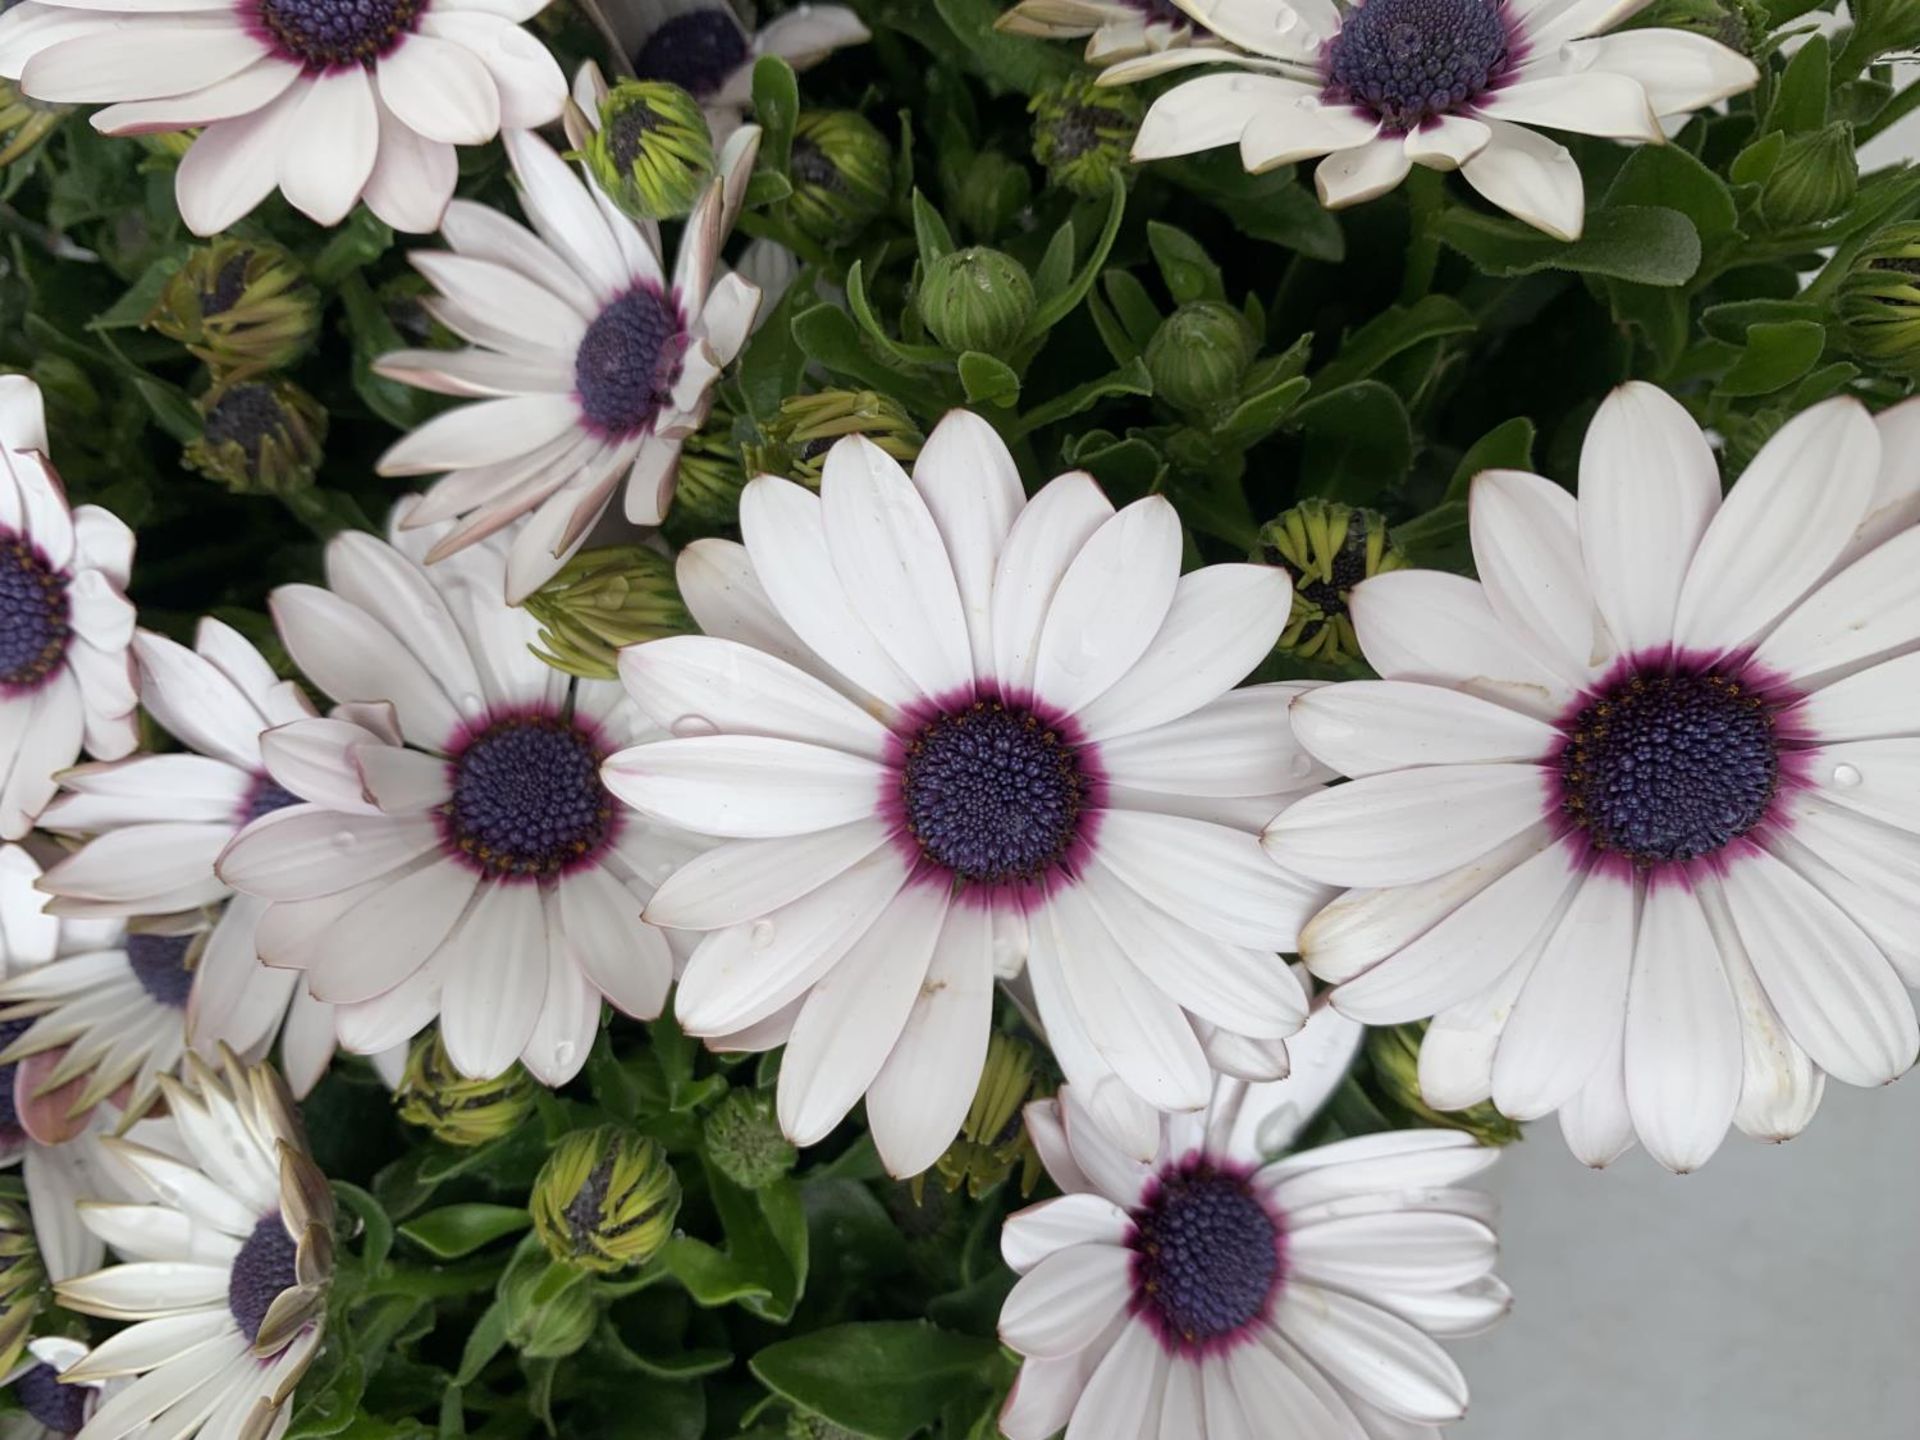 TWELVE WHITE COLOURED OSTEOSPERMUM PLANTS ON A TRAY TO BE SOLD FOR THE TWELVE PLUS VAT - Image 3 of 5